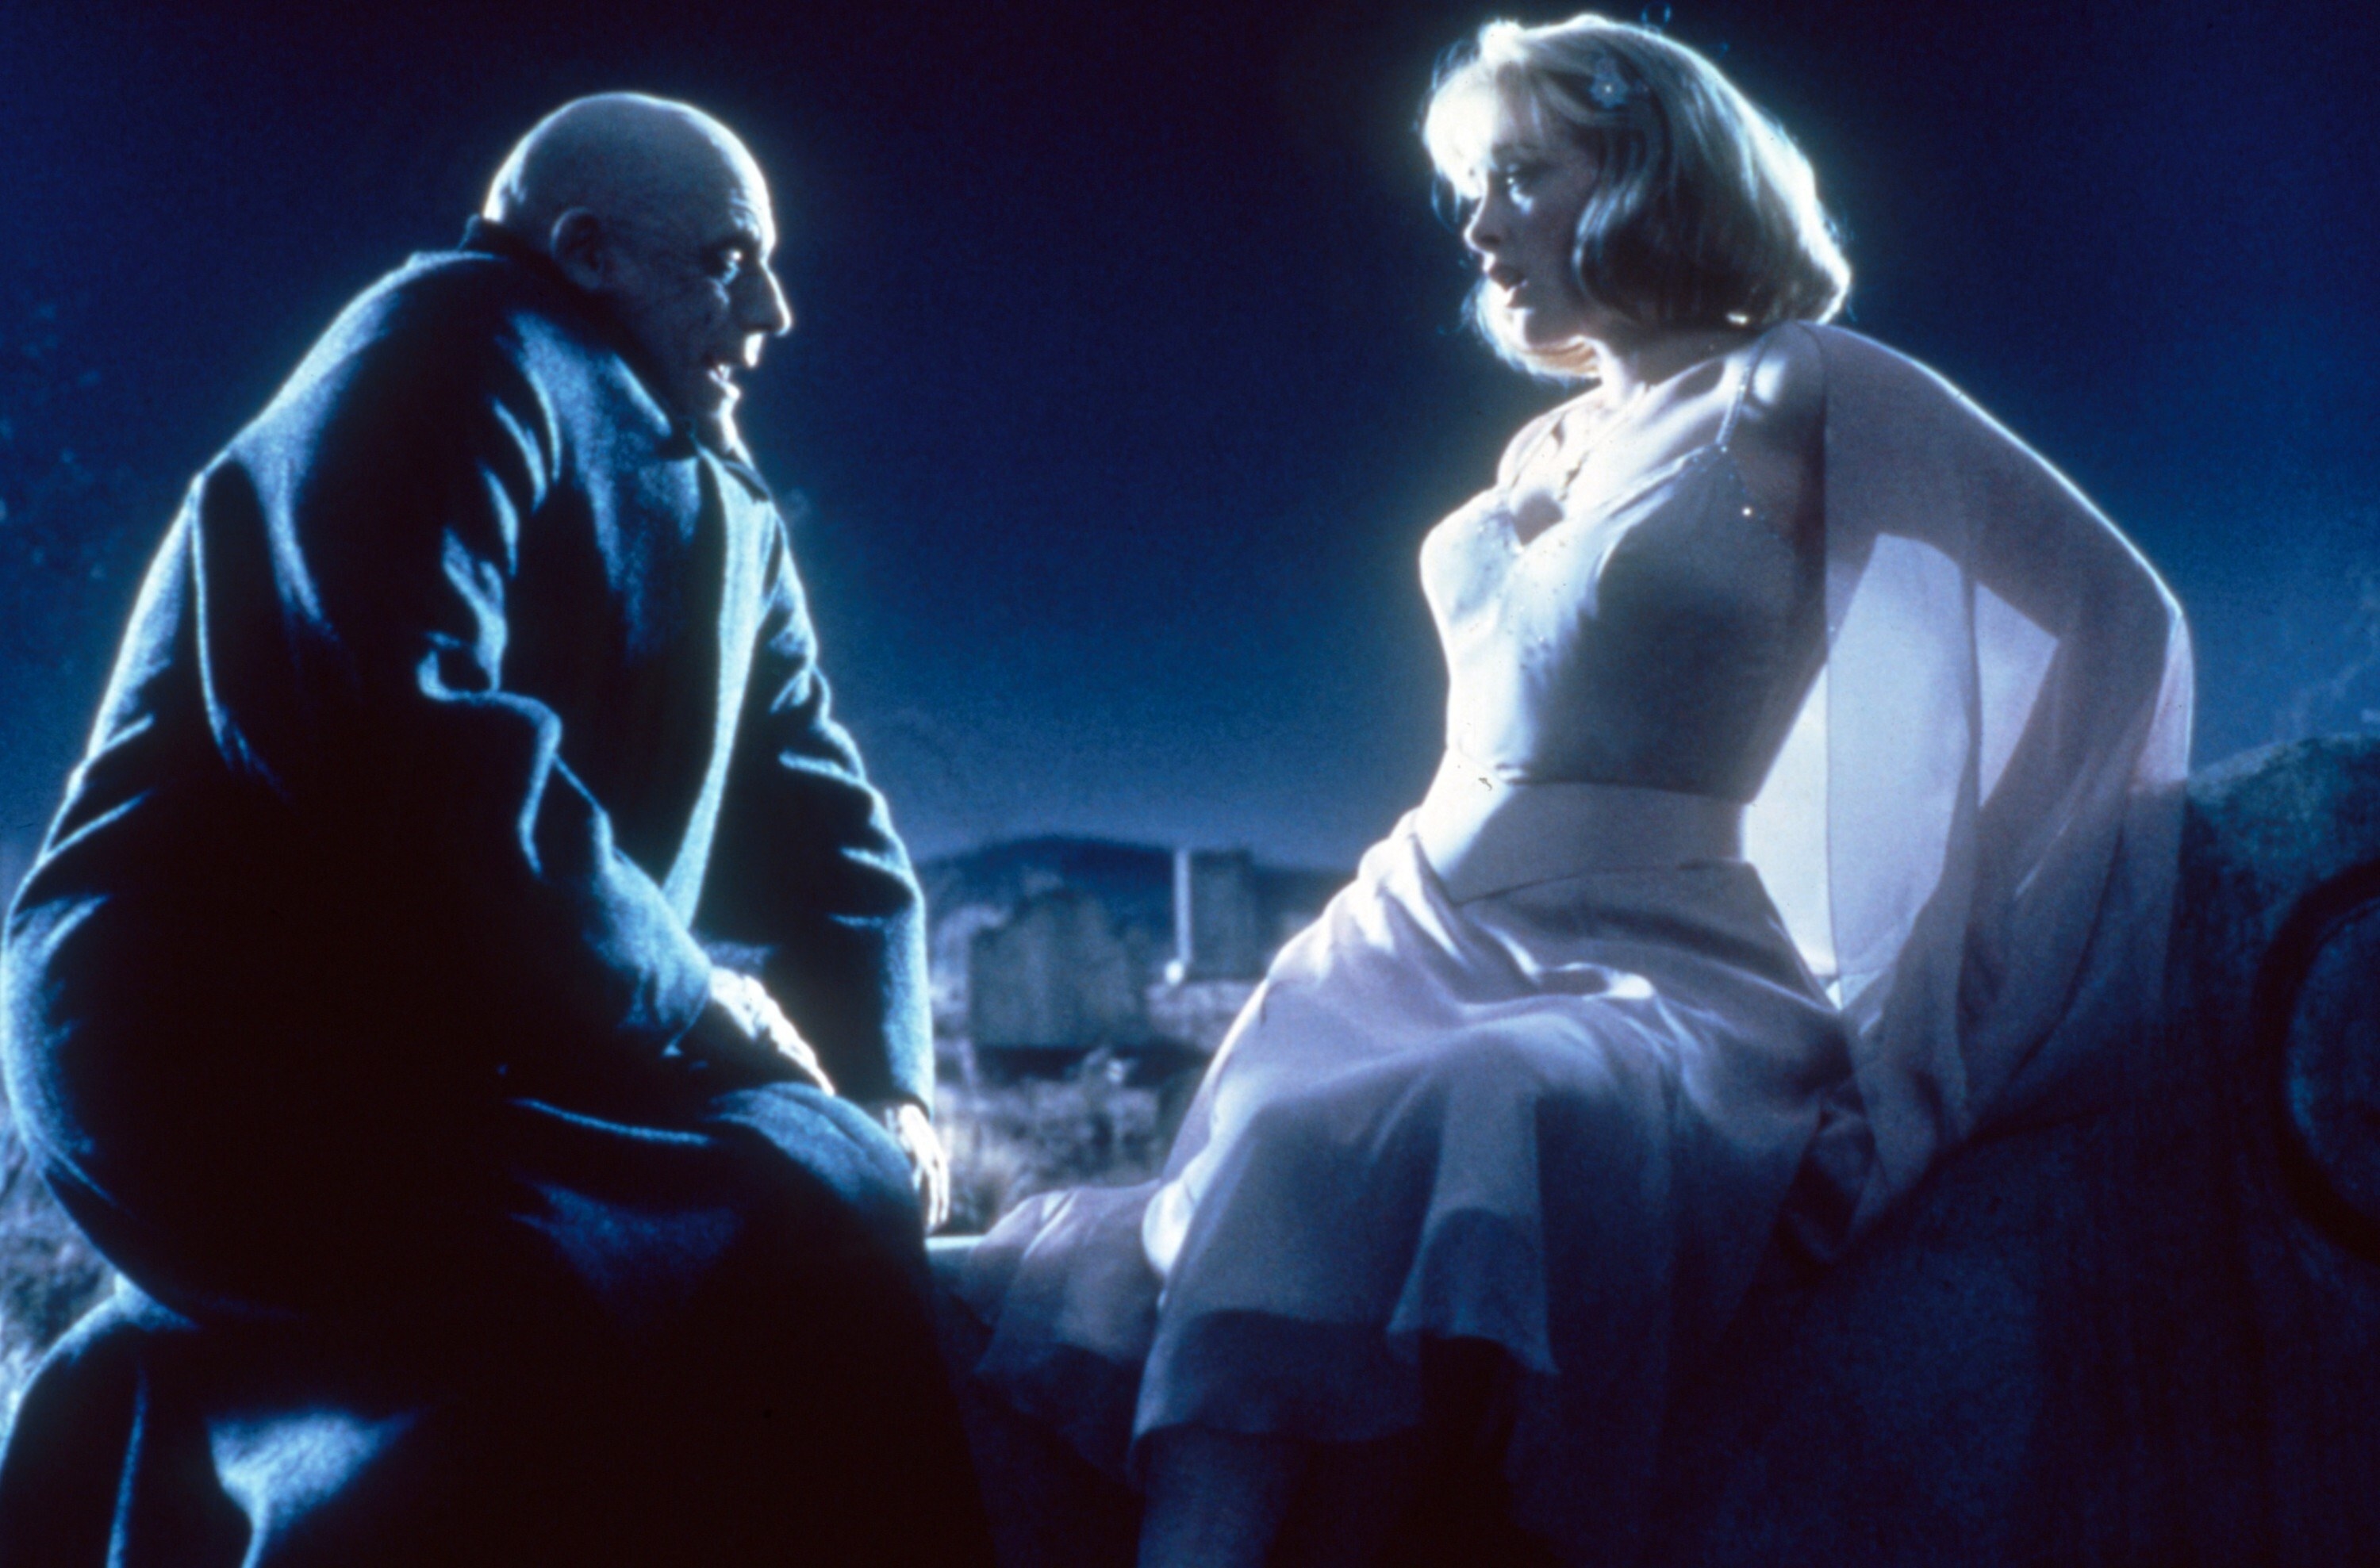 Christopher Lloyd and Joan Cusack in “Addams Family Values”